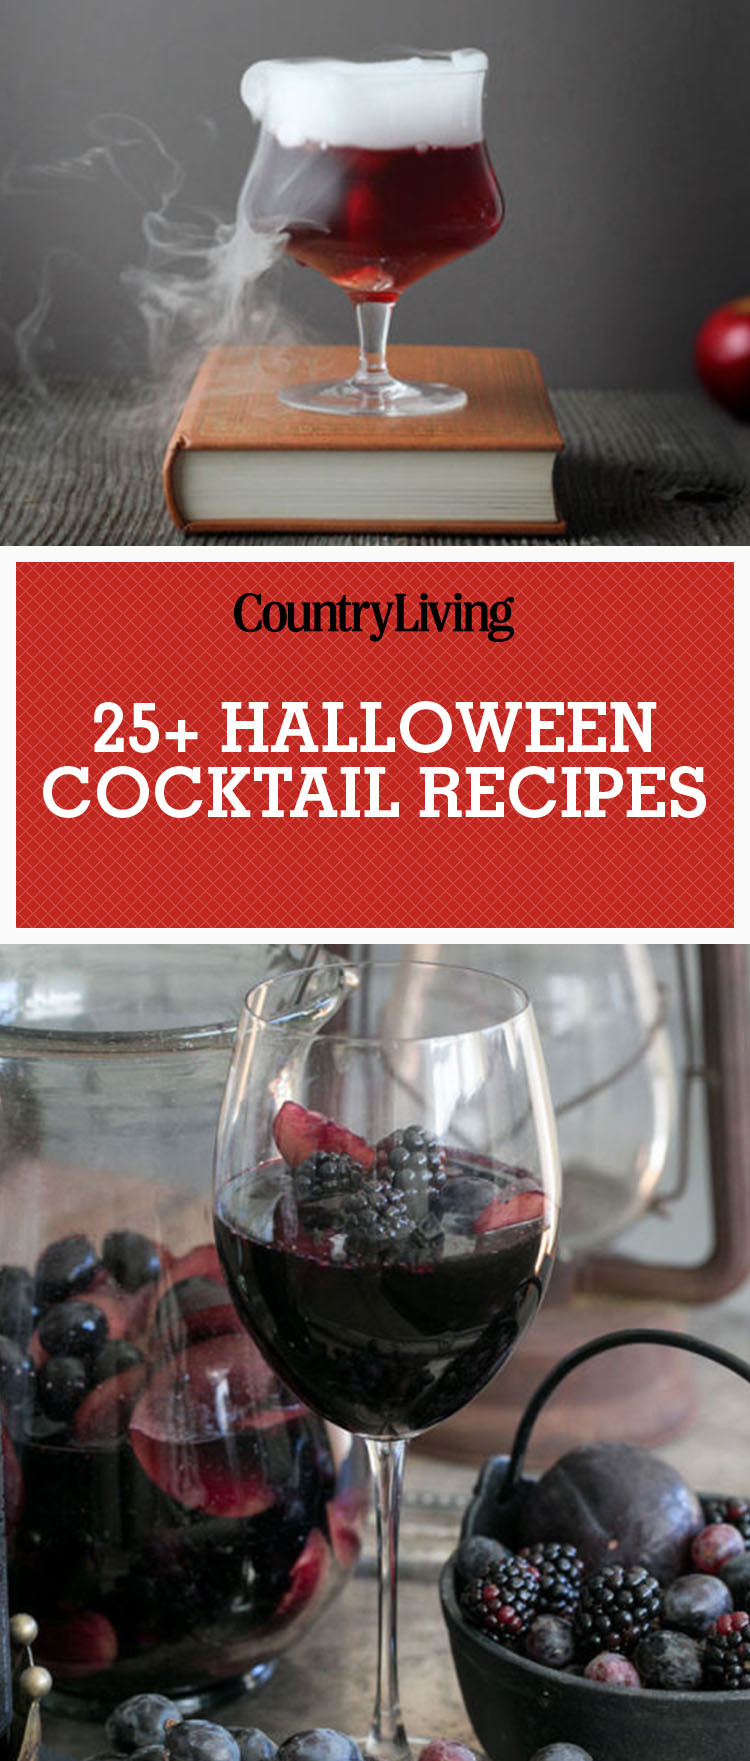 Easy Halloween Alcoholic Drinks
 25 Easy Halloween Cocktails & Drinks Best Recipes for